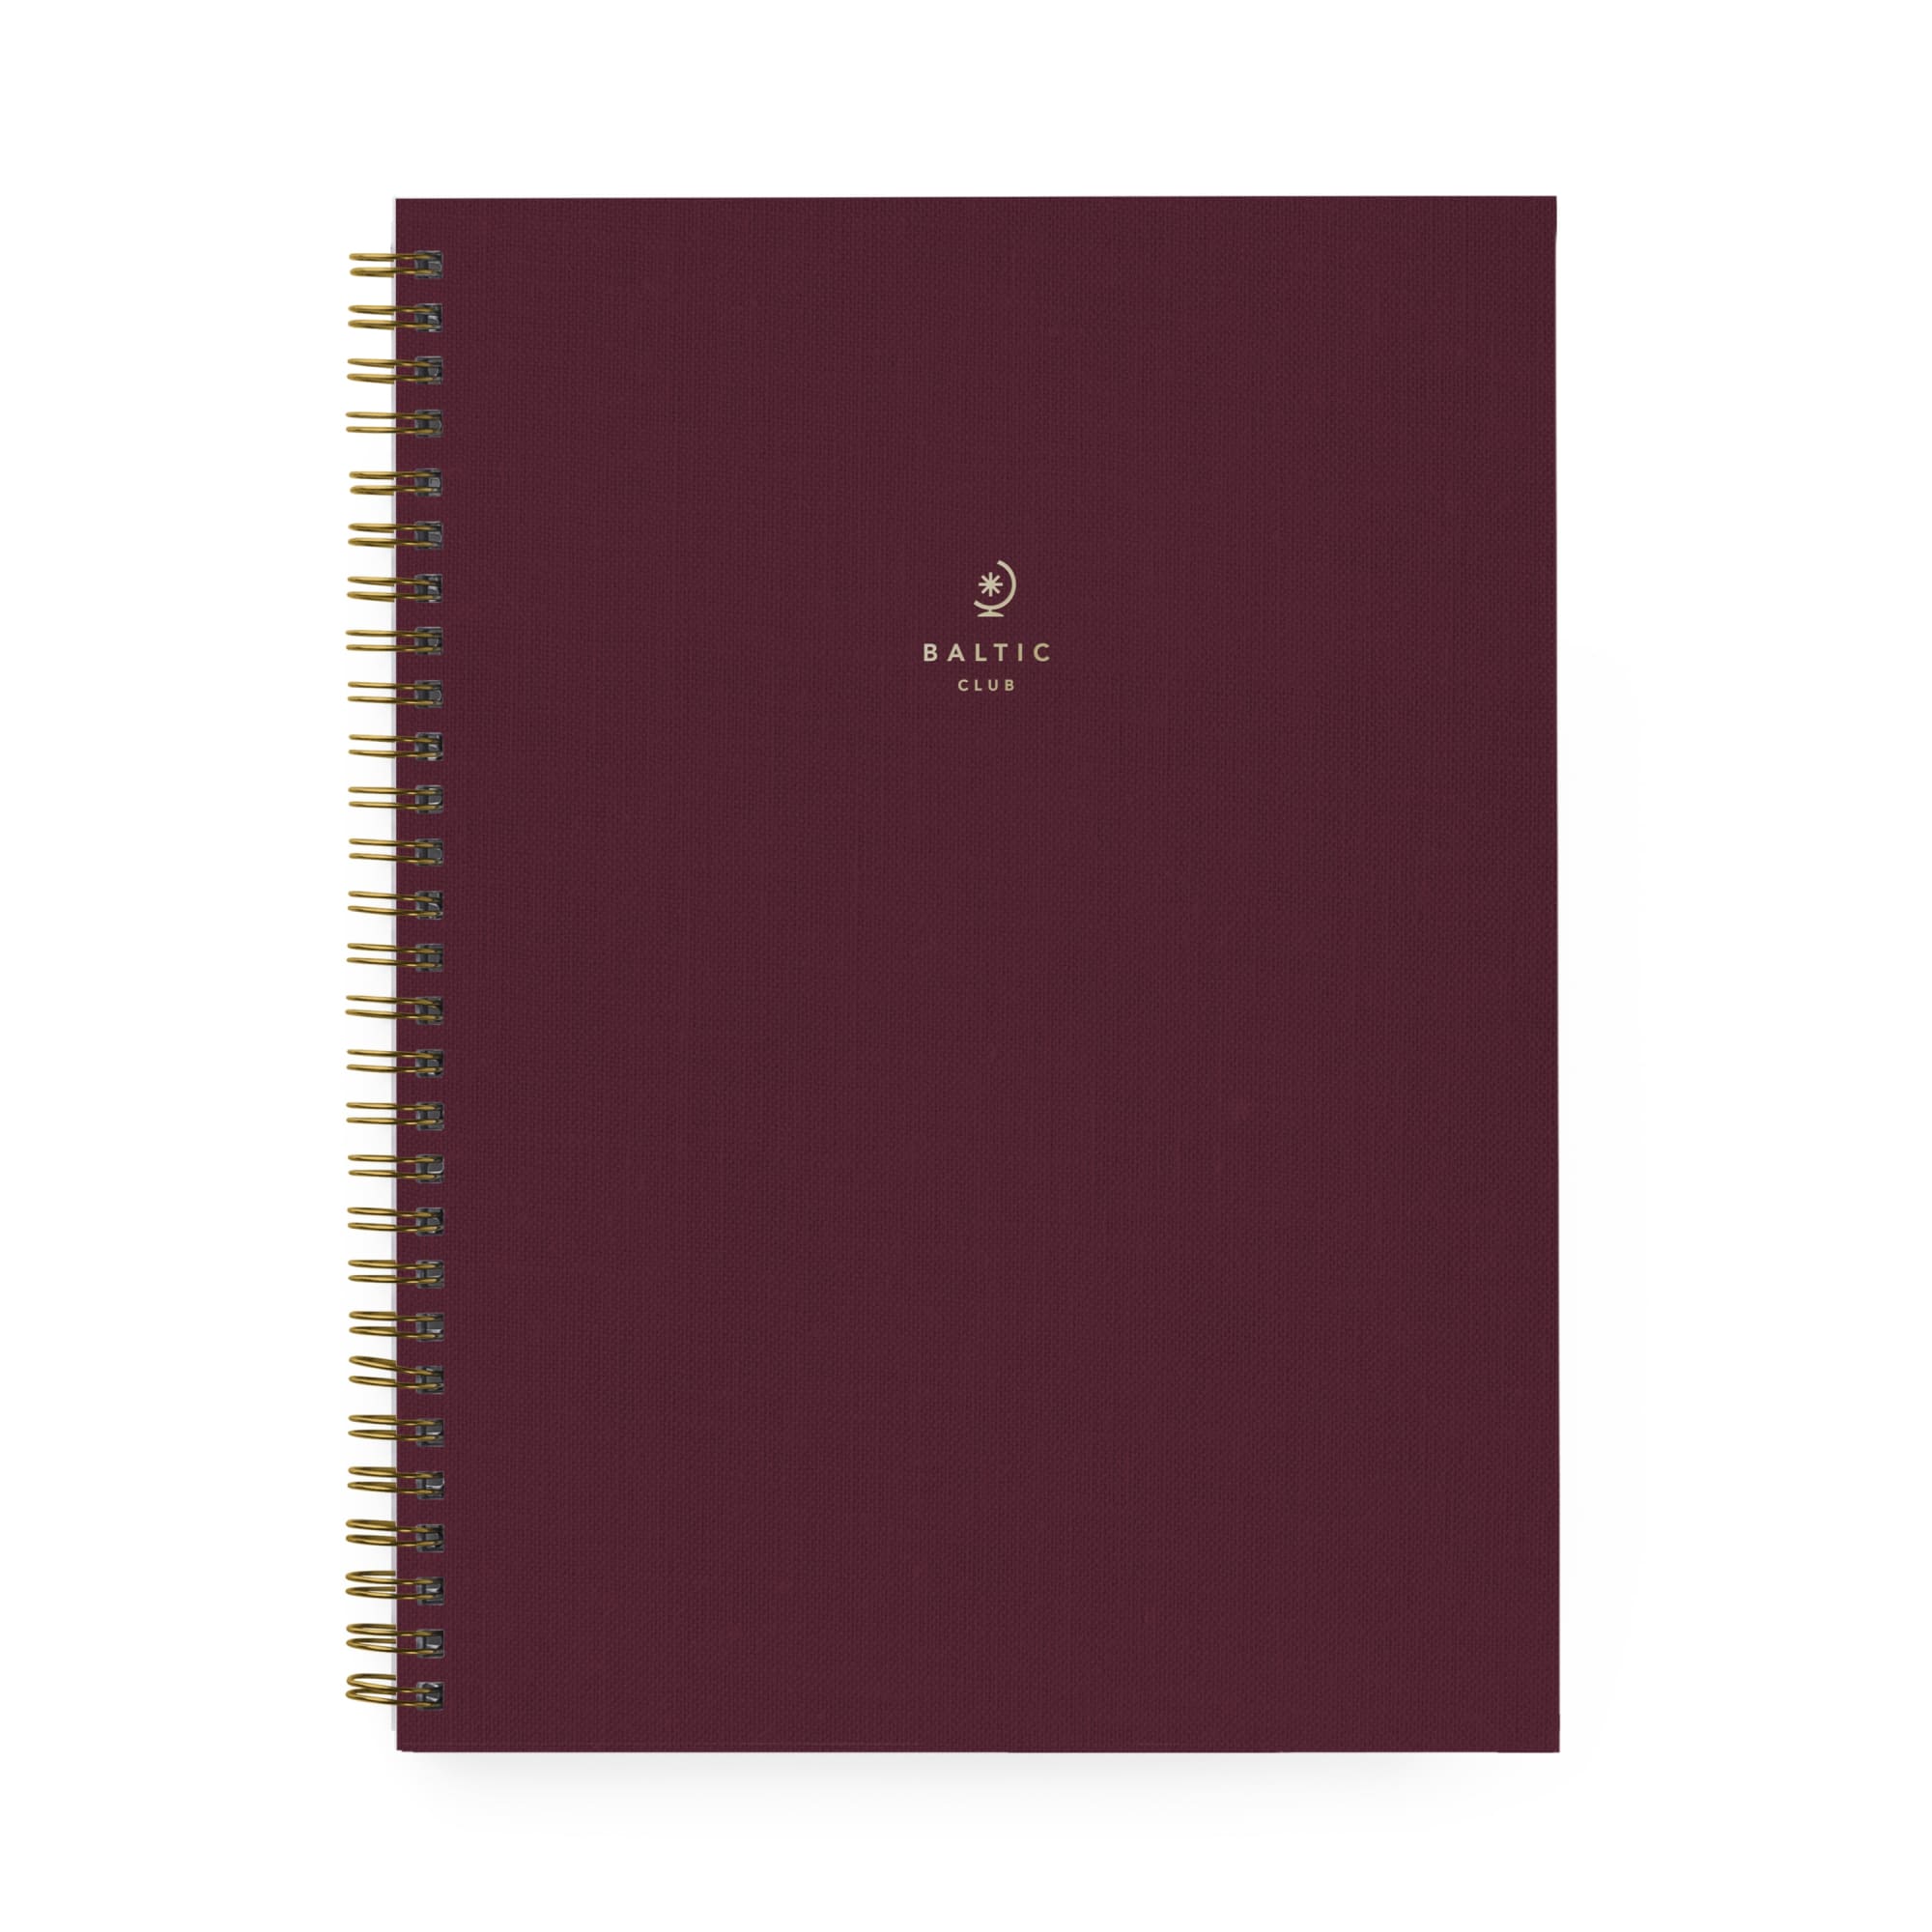 The front of the large burgundy cloth-covered spiral notebook by the Baltic Club